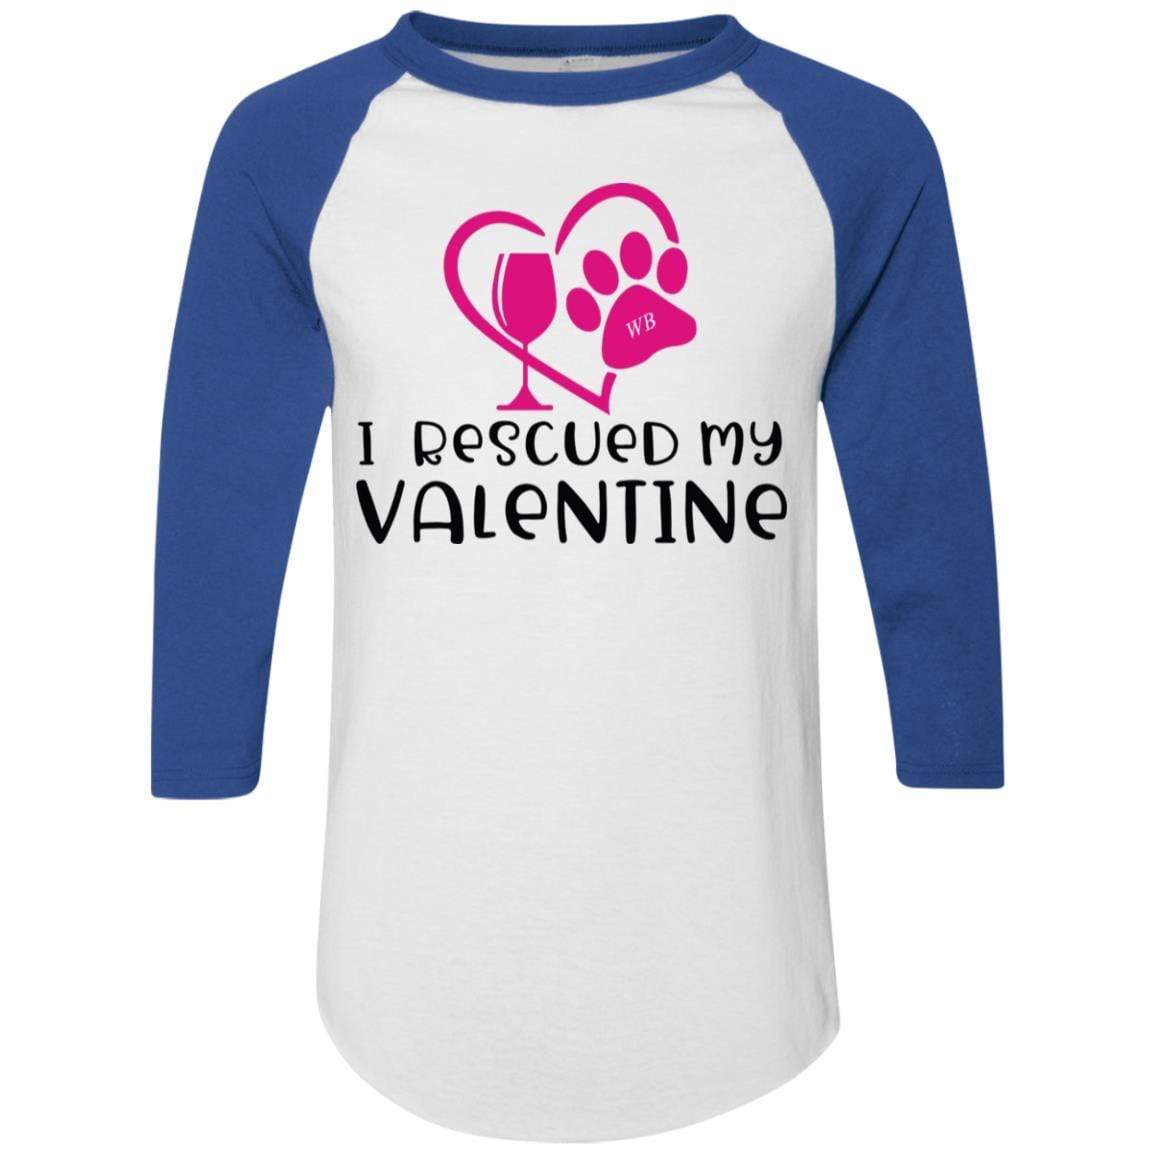 T-Shirts White/Royal / S Winey Bitches Co "I Rescued My Valentine" Colorblock Raglan Jersey WineyBitchesCo